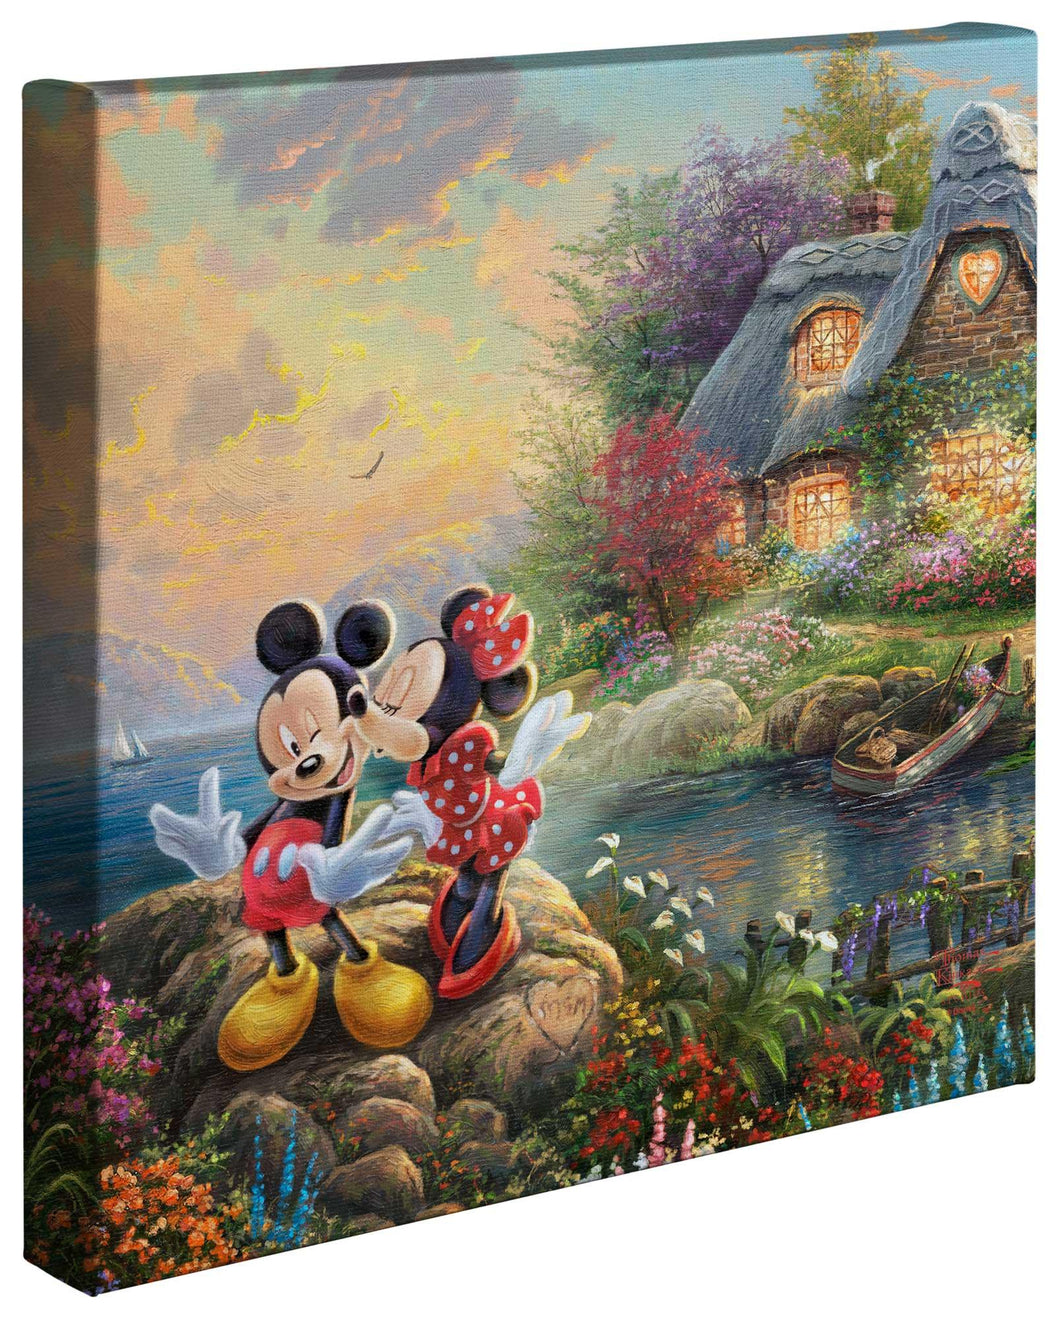 Mickey & Minnie Sweetheart Cove - Gallery Wrapped Canvas - Art Of Entertainment